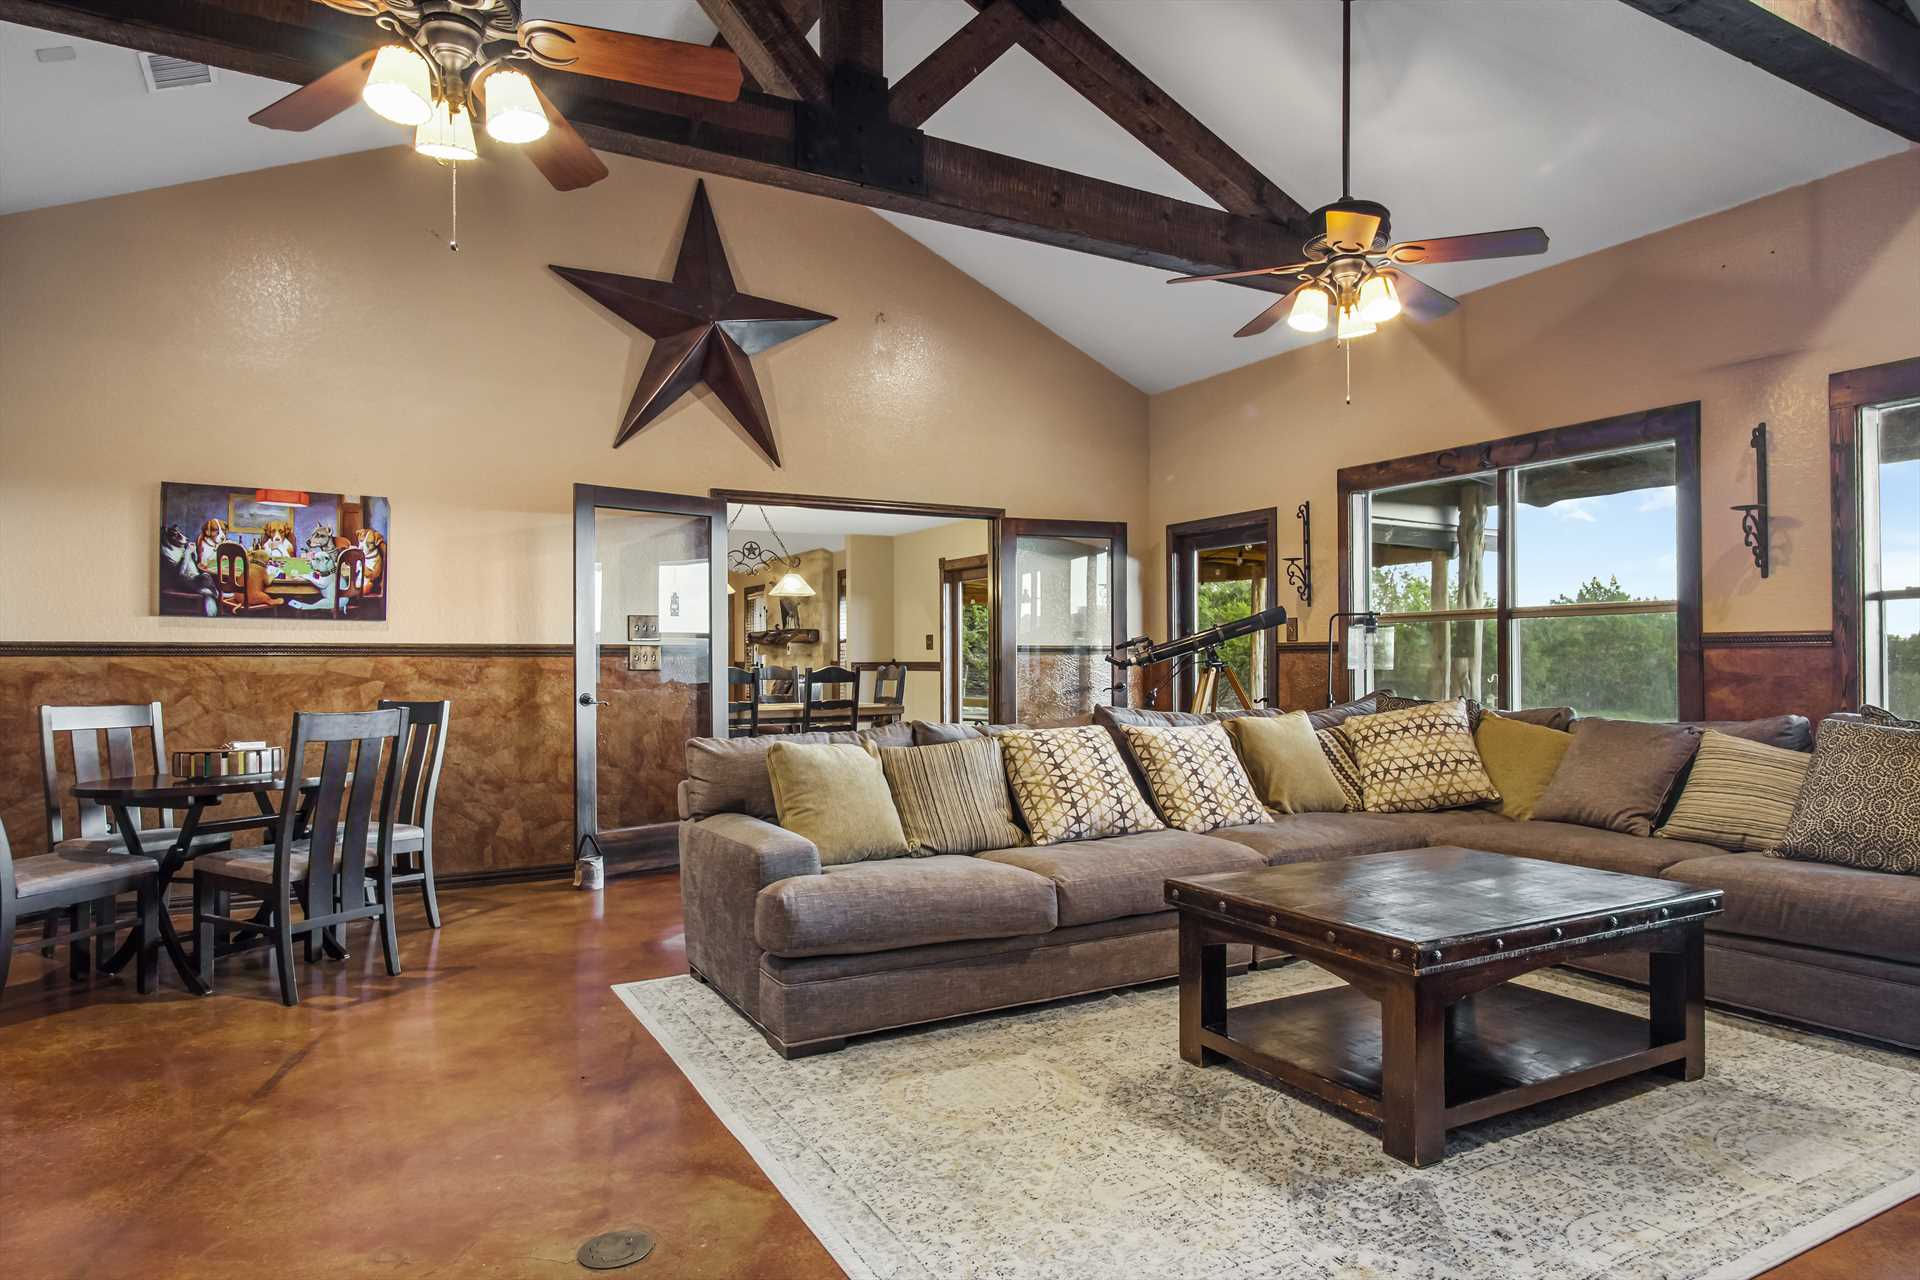                                                 Lone Star touches and stone work throughout the retreat give it a robust and welcoming ranch feel.